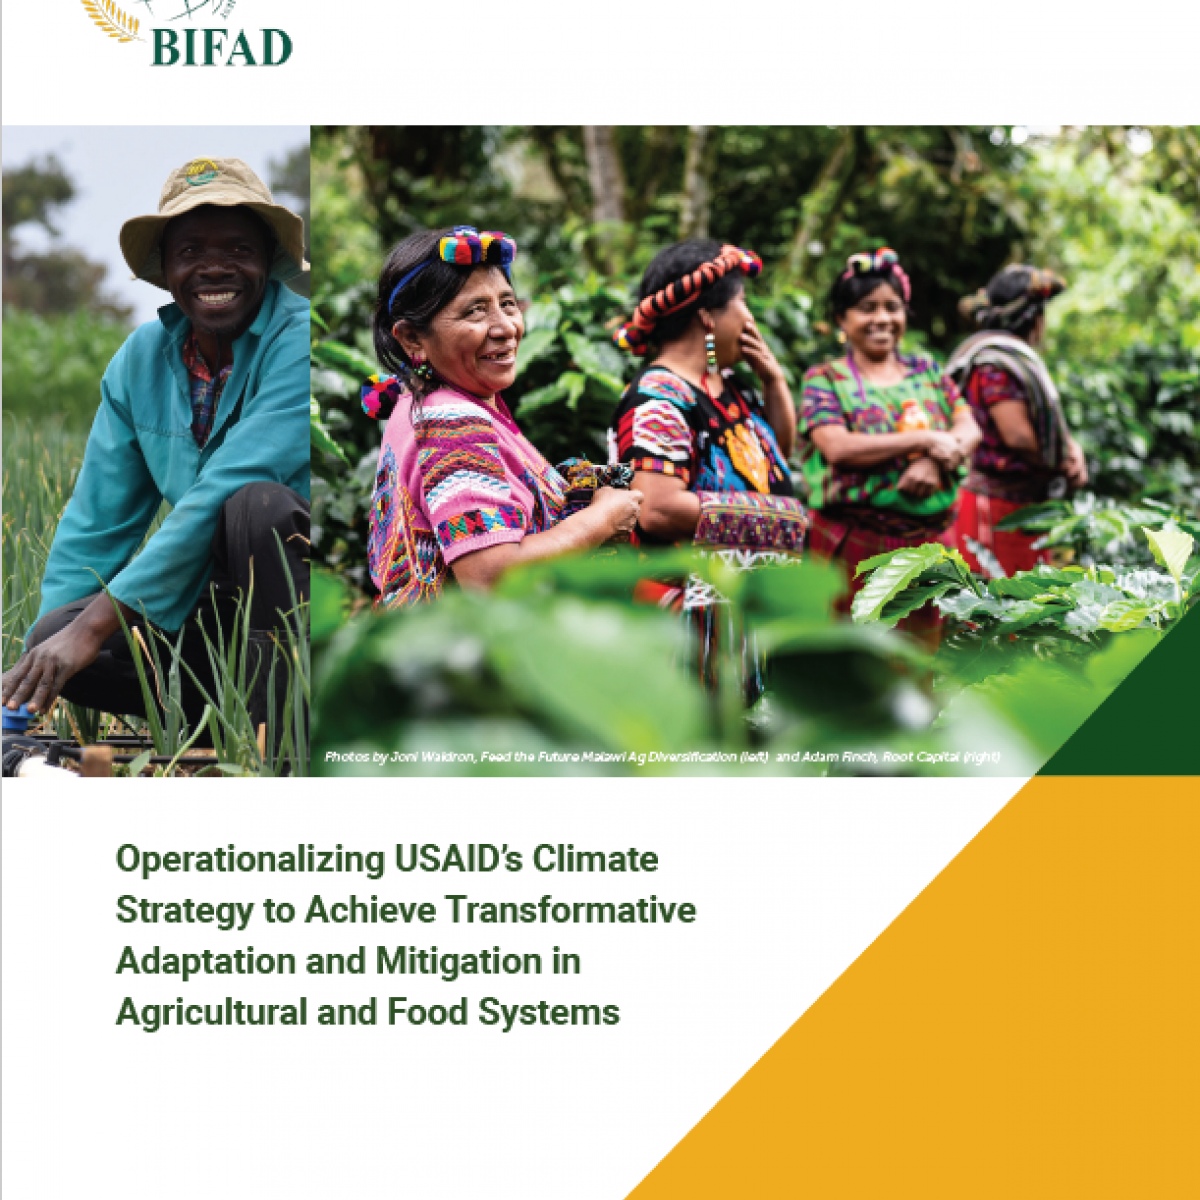 Operationalizing USAID’s Climate Strategy to Achieve Transformative Adaptation and Mitigation in Agricultural and Food Systems